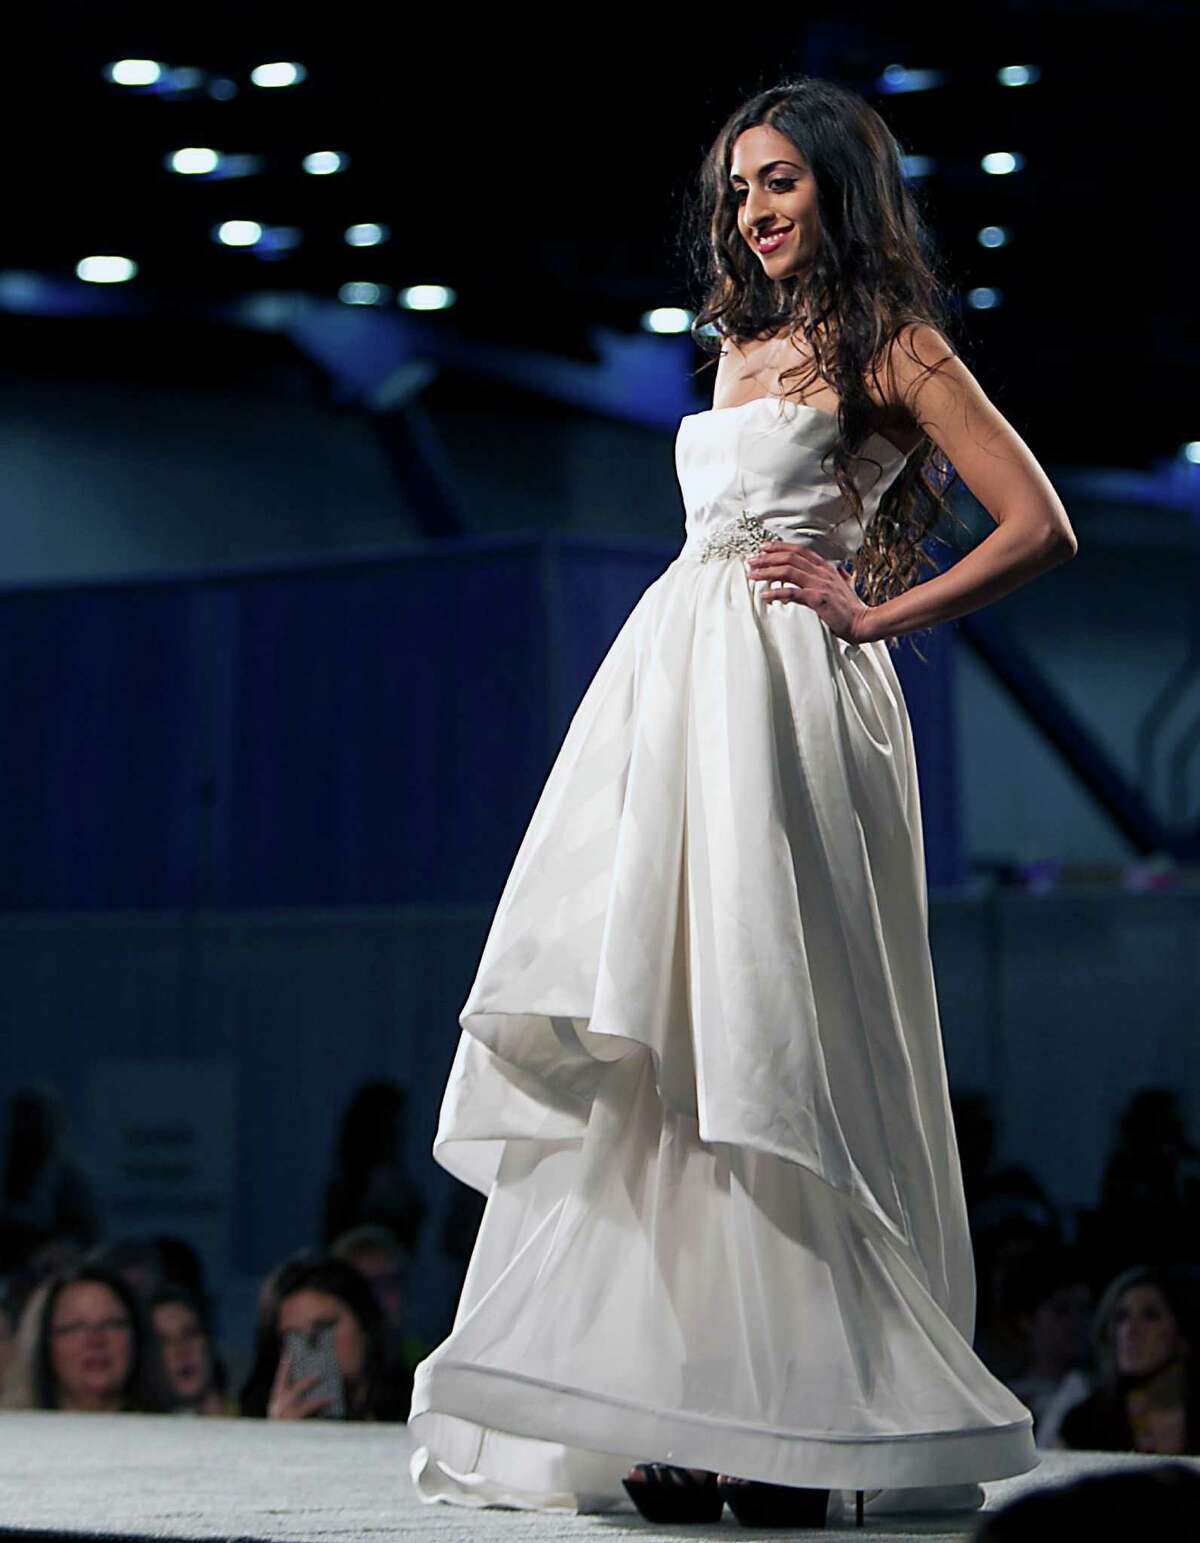 A model walks the runway during the Damsel White Label bridal fashion show at the 30th Bi-Annual Bridal Extravaganza Show at the George R. Brown Convention Center.